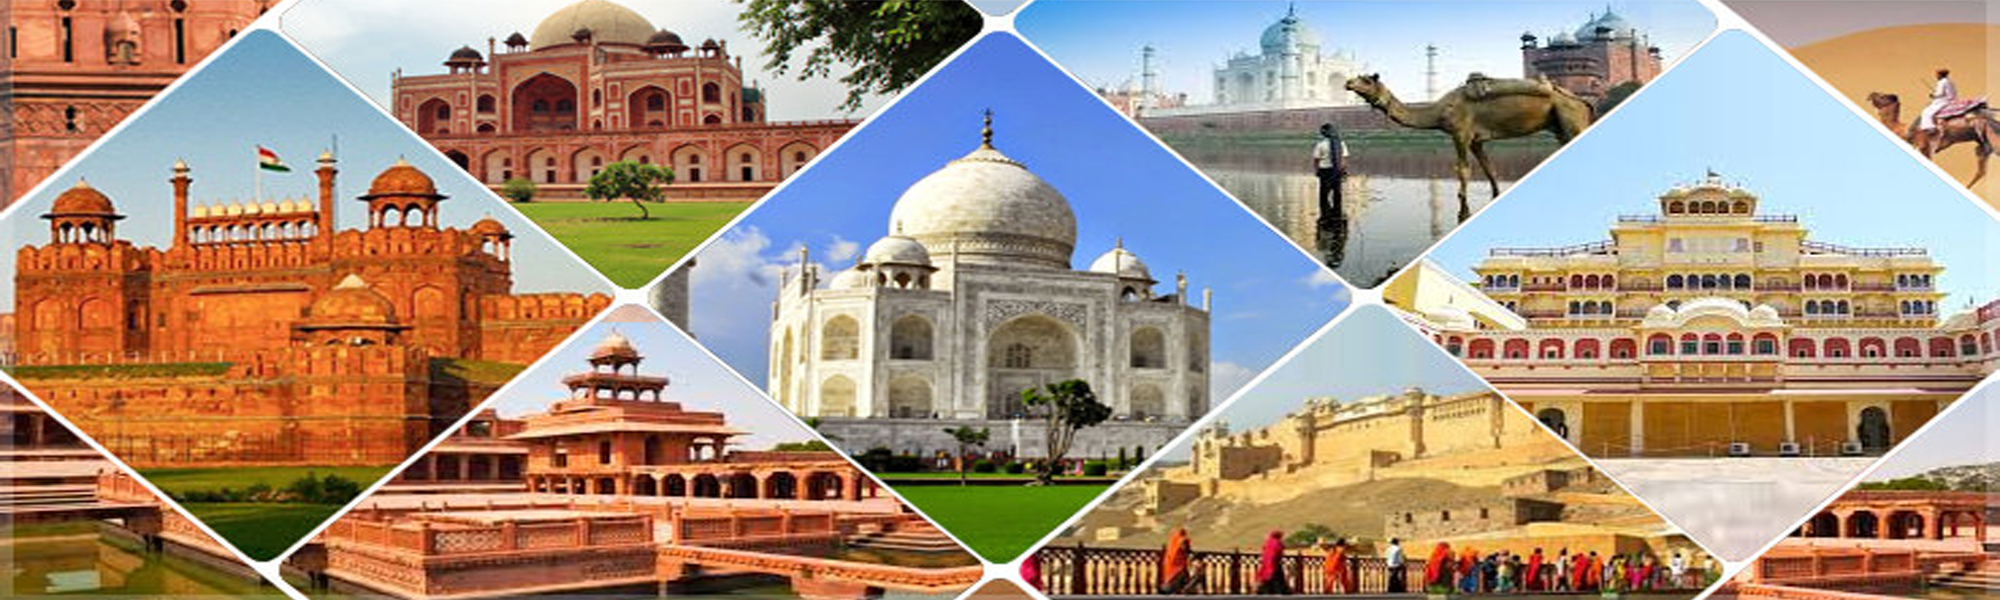 Camel Safari Tours in India with Golden Triangle Tours in India